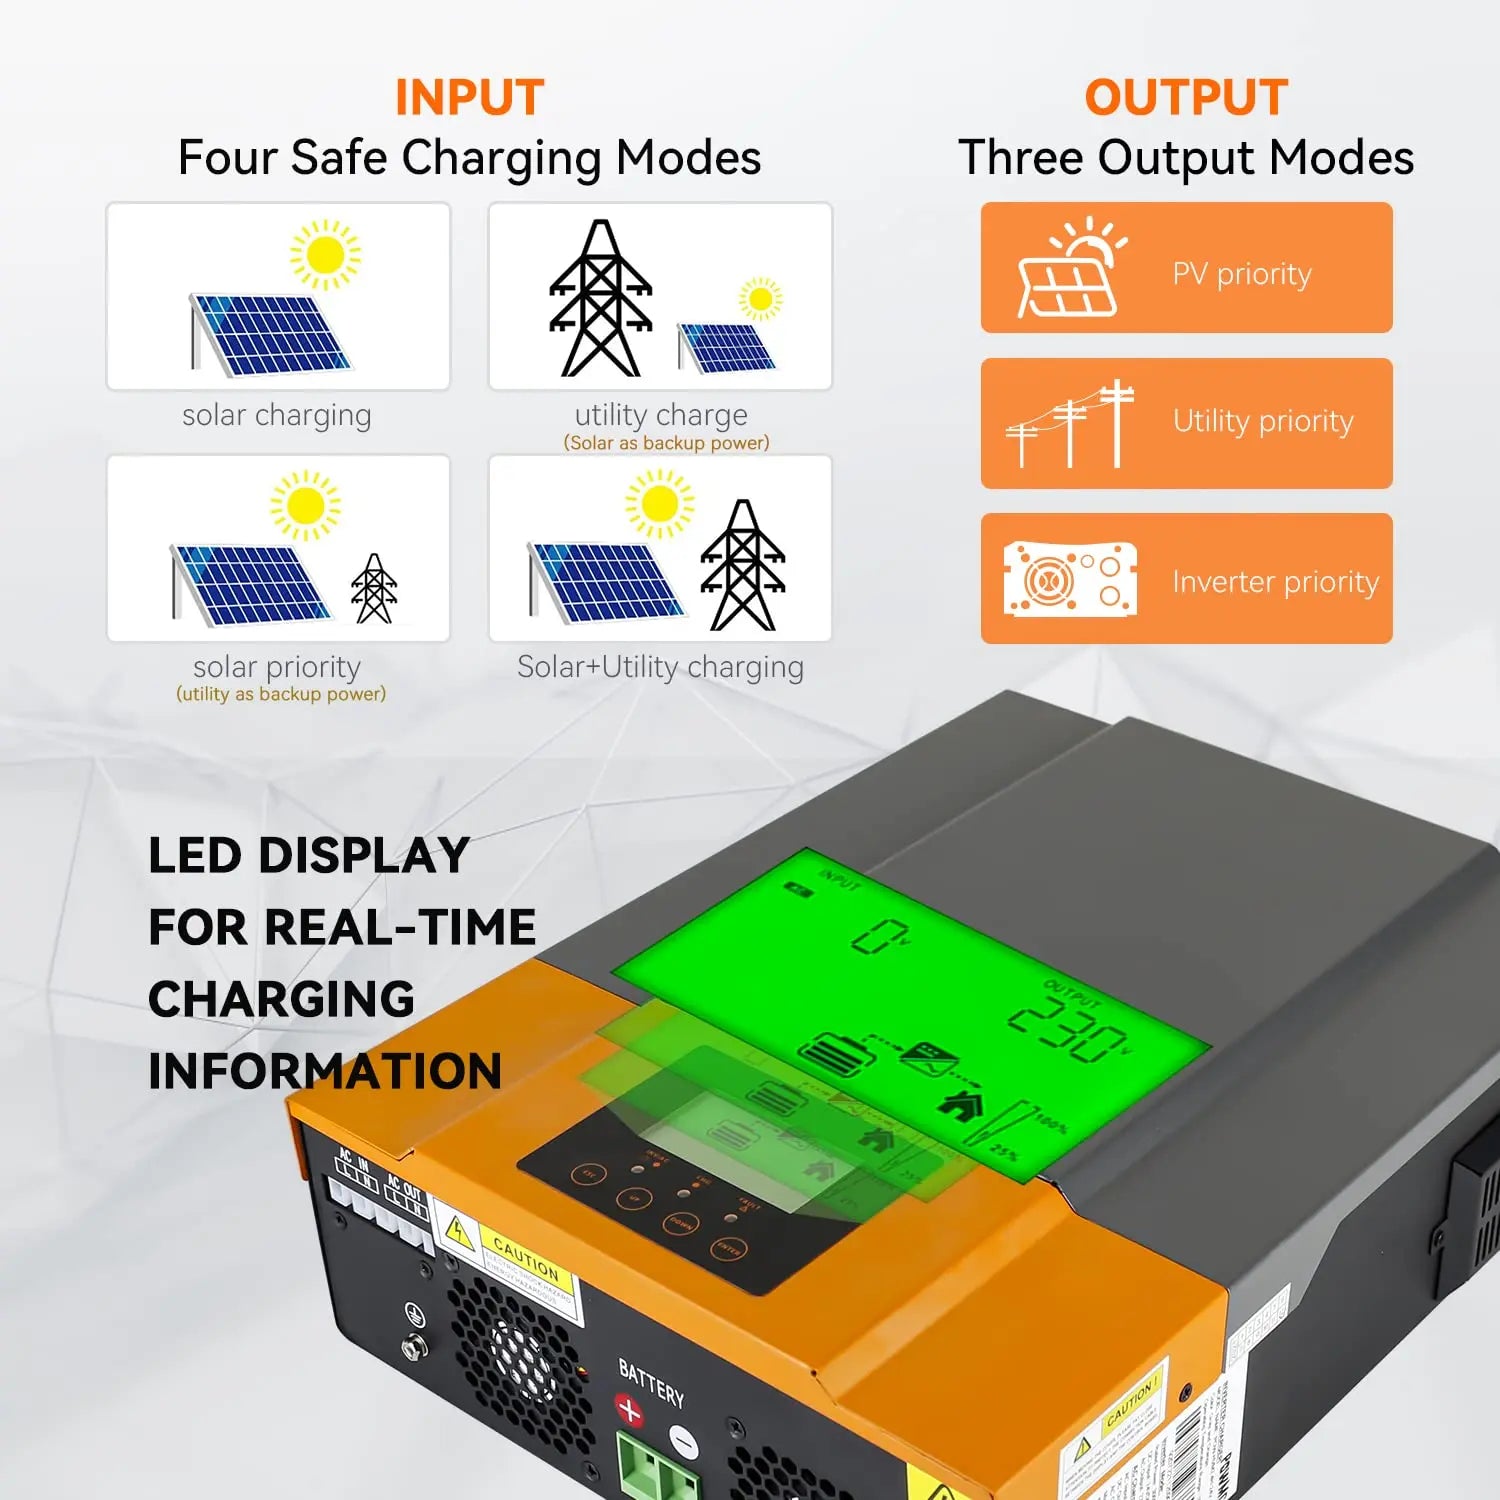 PowMr Hybrid Solar Inverter, Advanced features for safe and efficient charging: four modes, real-time info, and max 230V input.